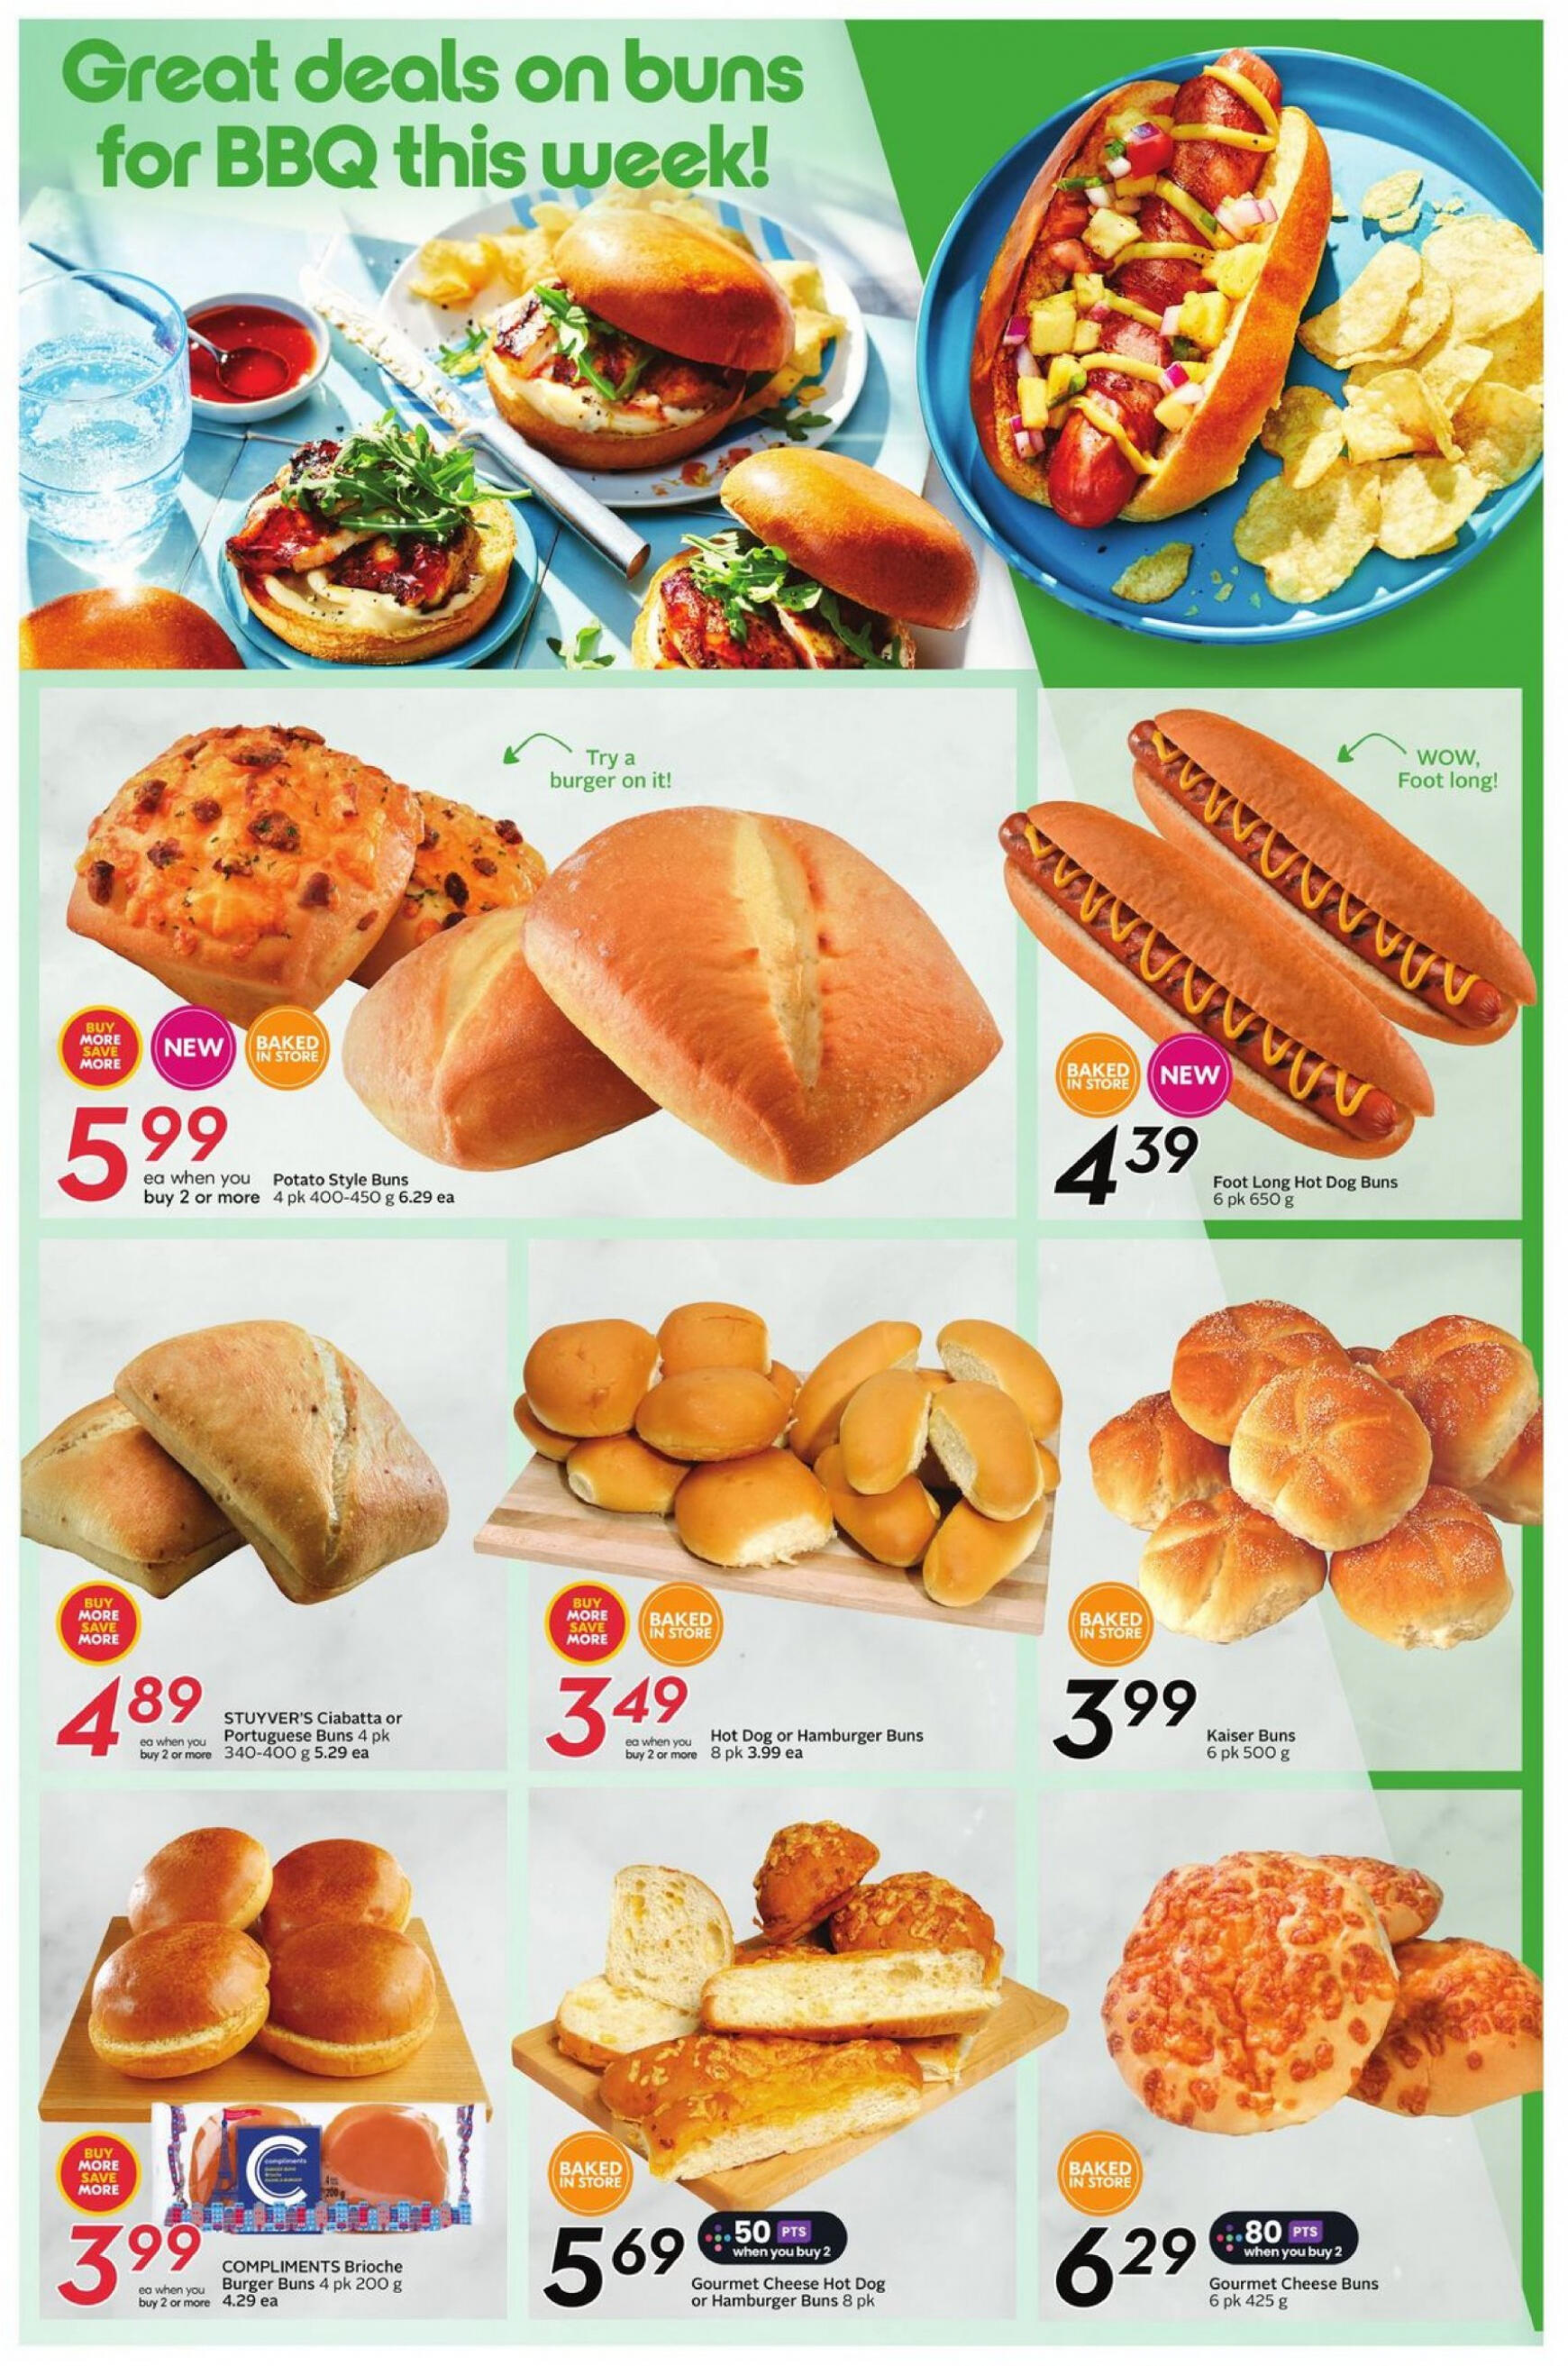 sobeys - Sobeys - Weekly Flyer - Ontario flyer current 06.06. - 12.06. - page: 13